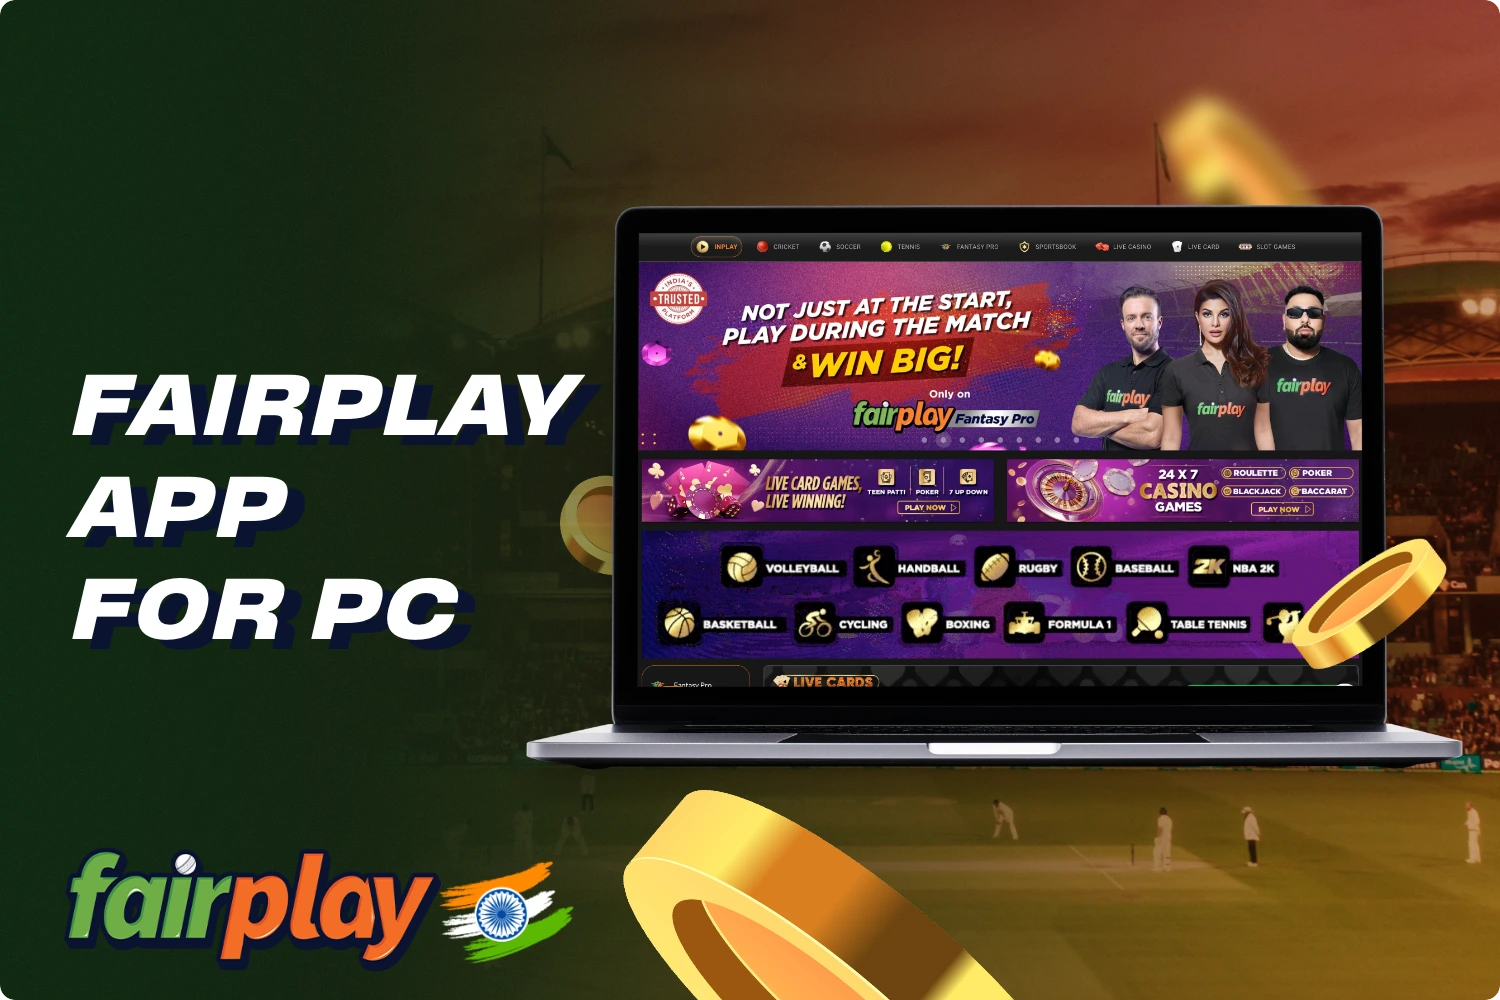 Fairplay users don't need to use a special PC program, as they can bet and play casino games in one of their favorite browsers